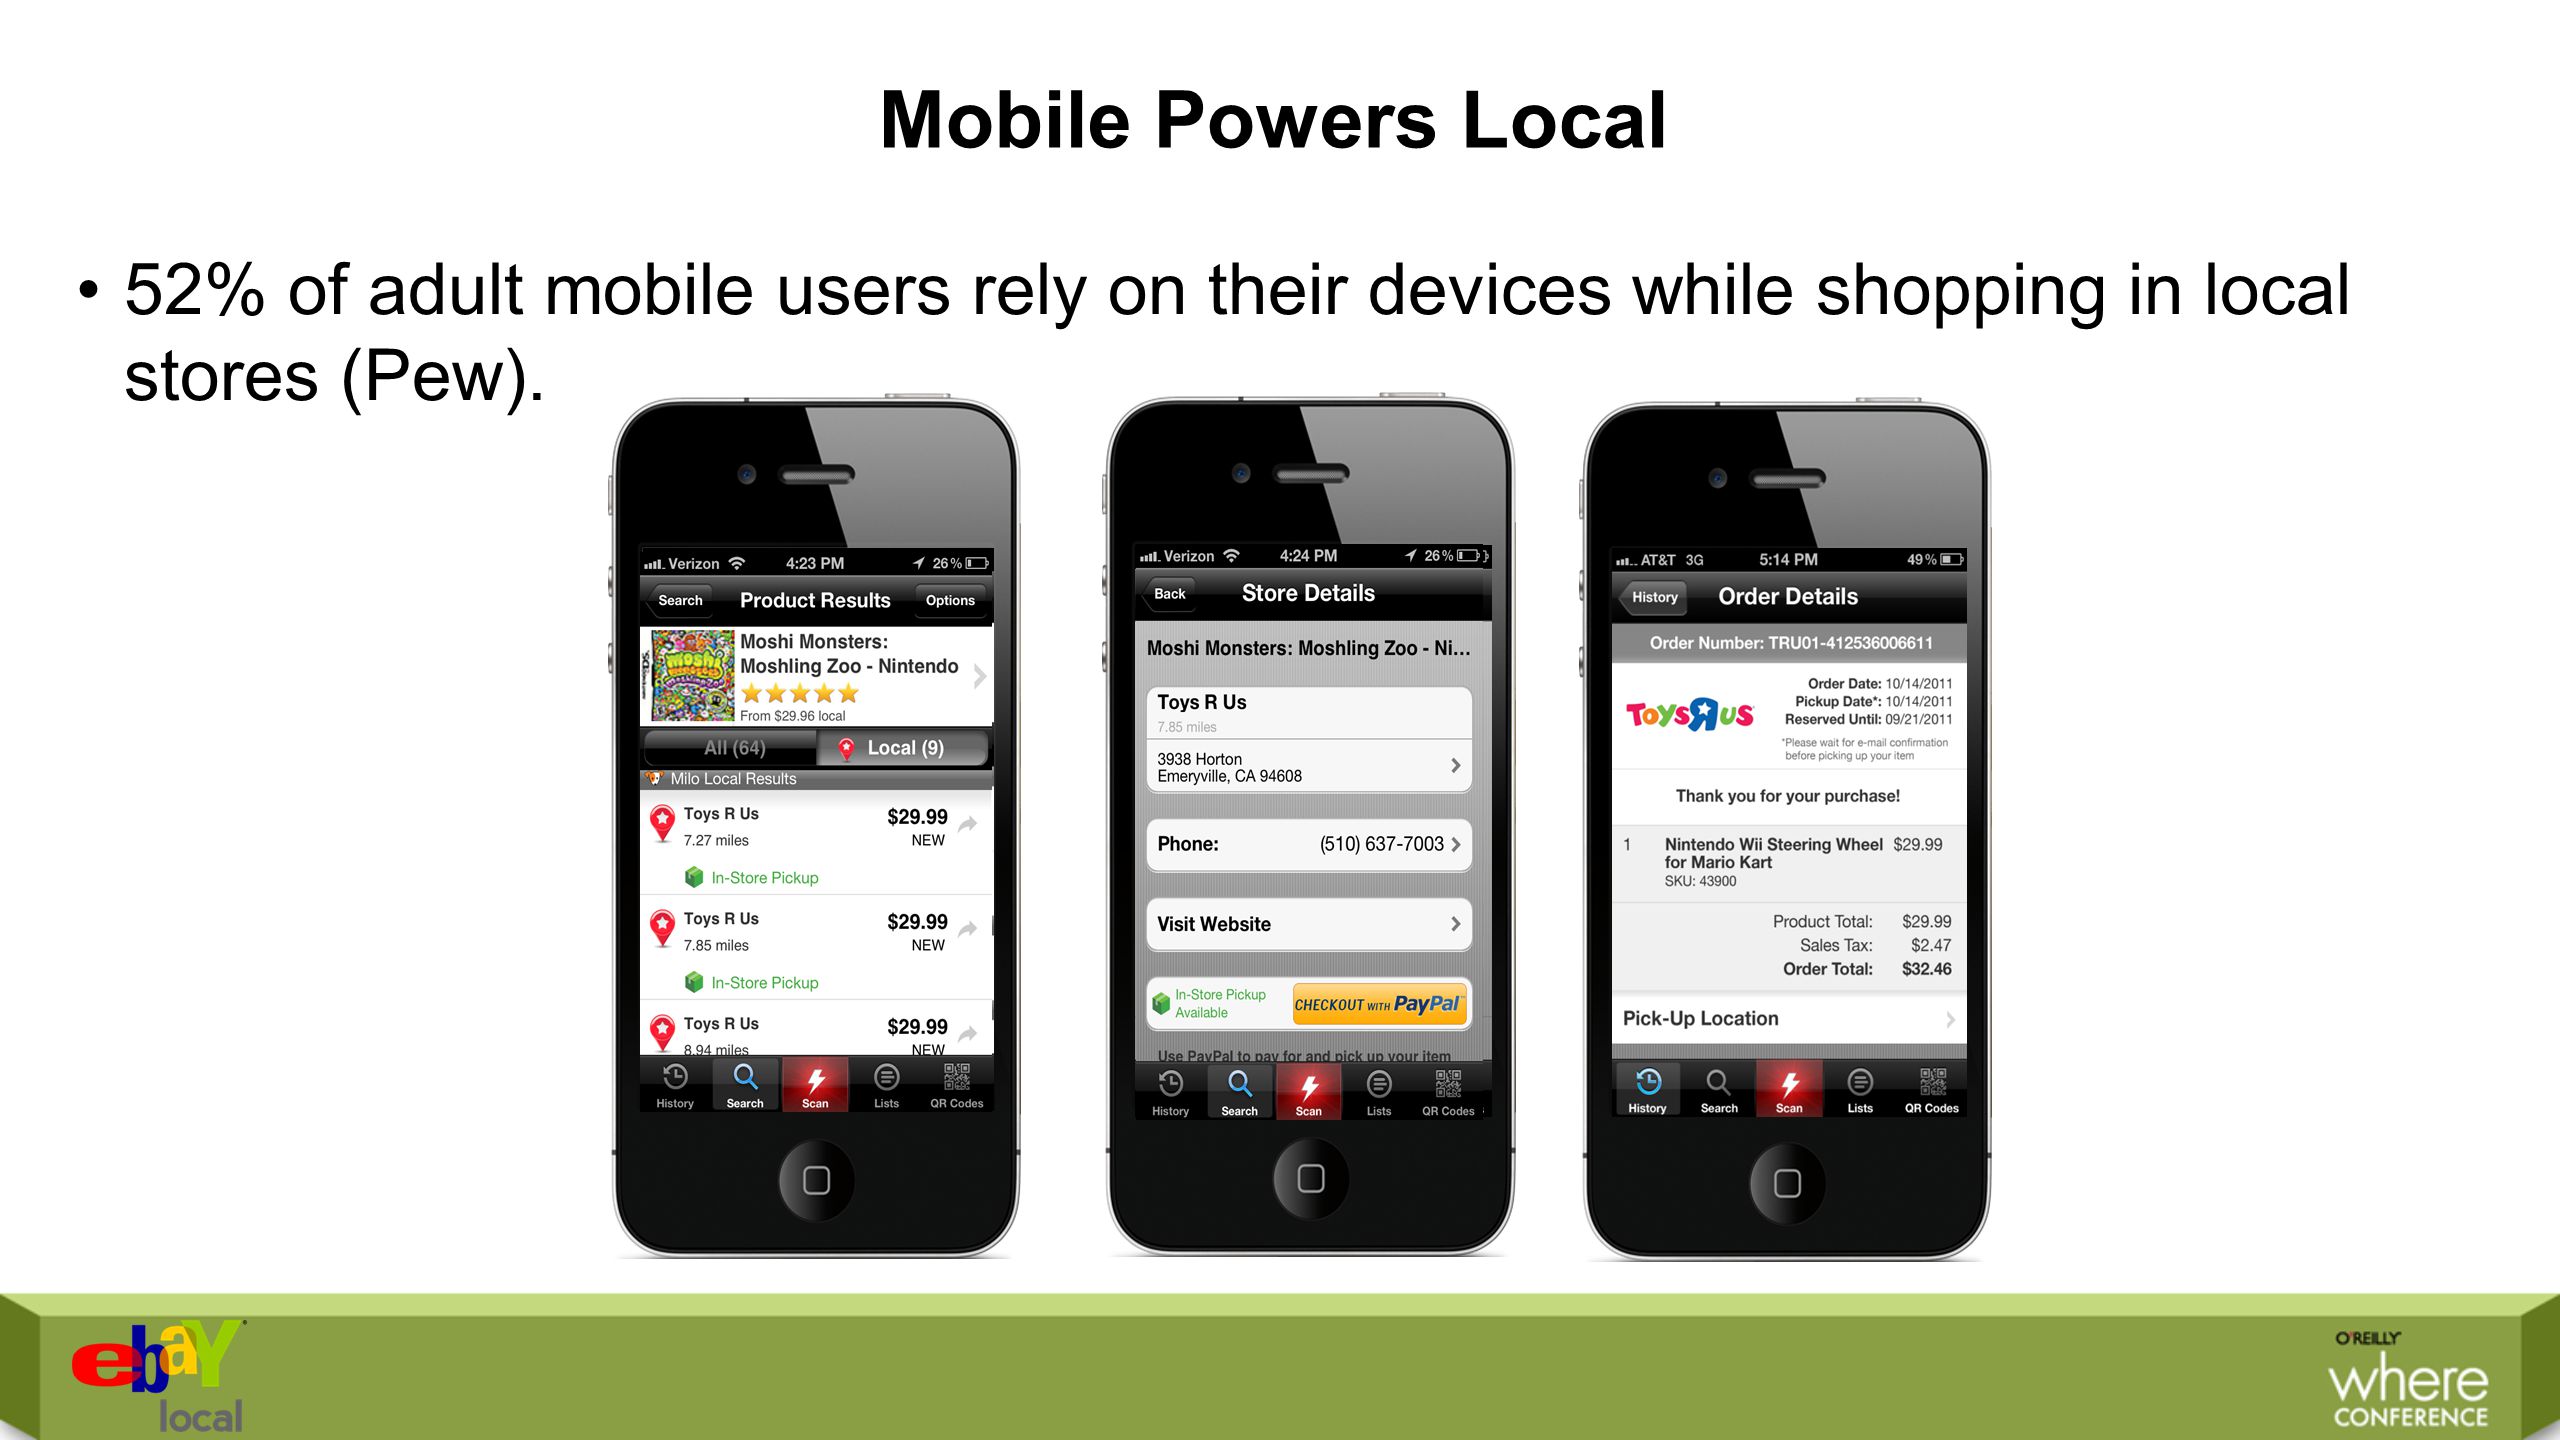 Mobile Powers Local 52% of adult mobile users rely on their devices while shopping in local stores (Pew).